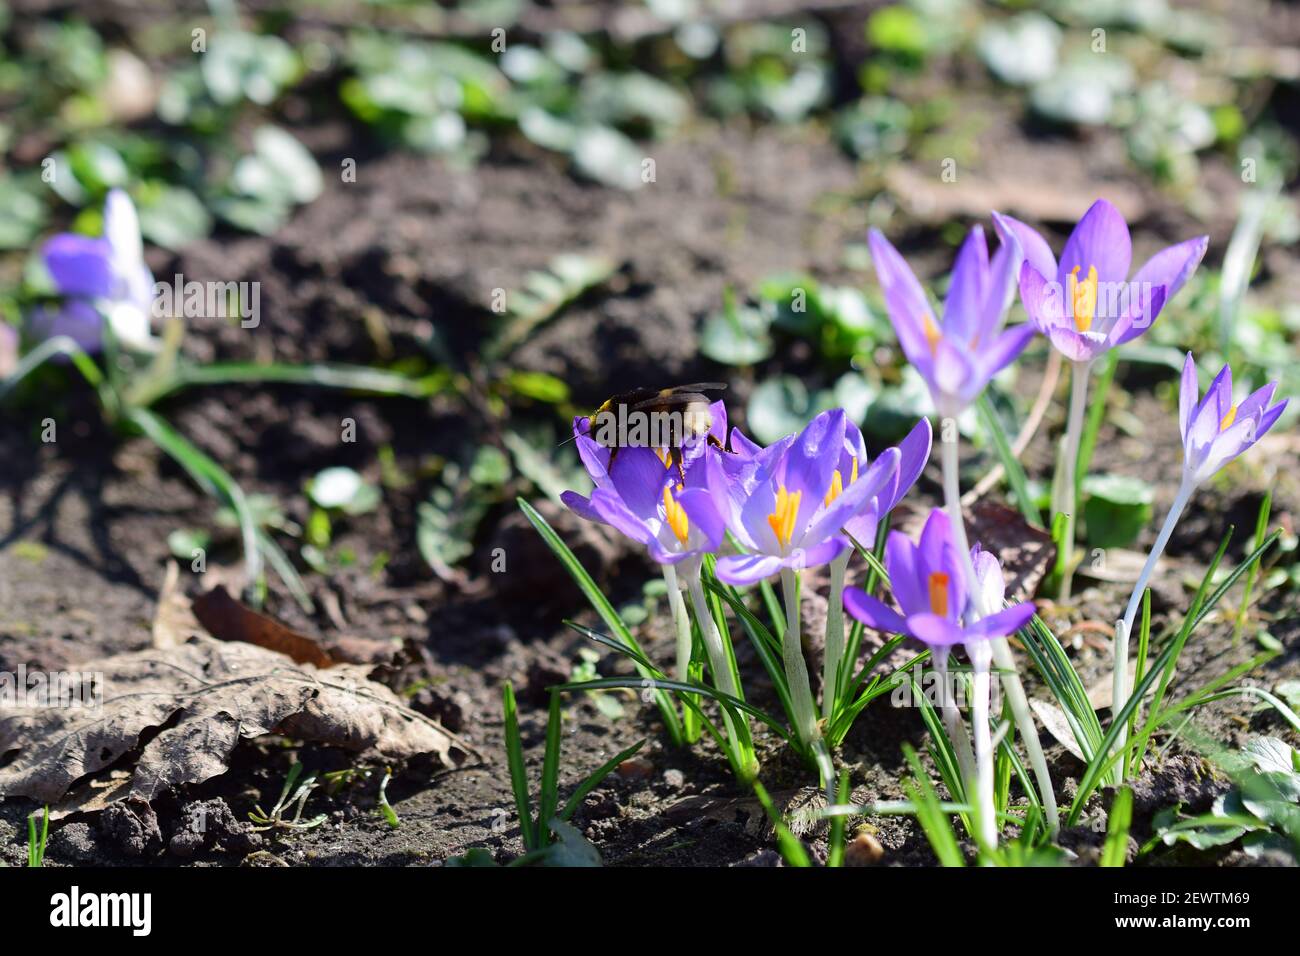 Crocusflower with a bumble bee on a meadow in the park Stock Photo